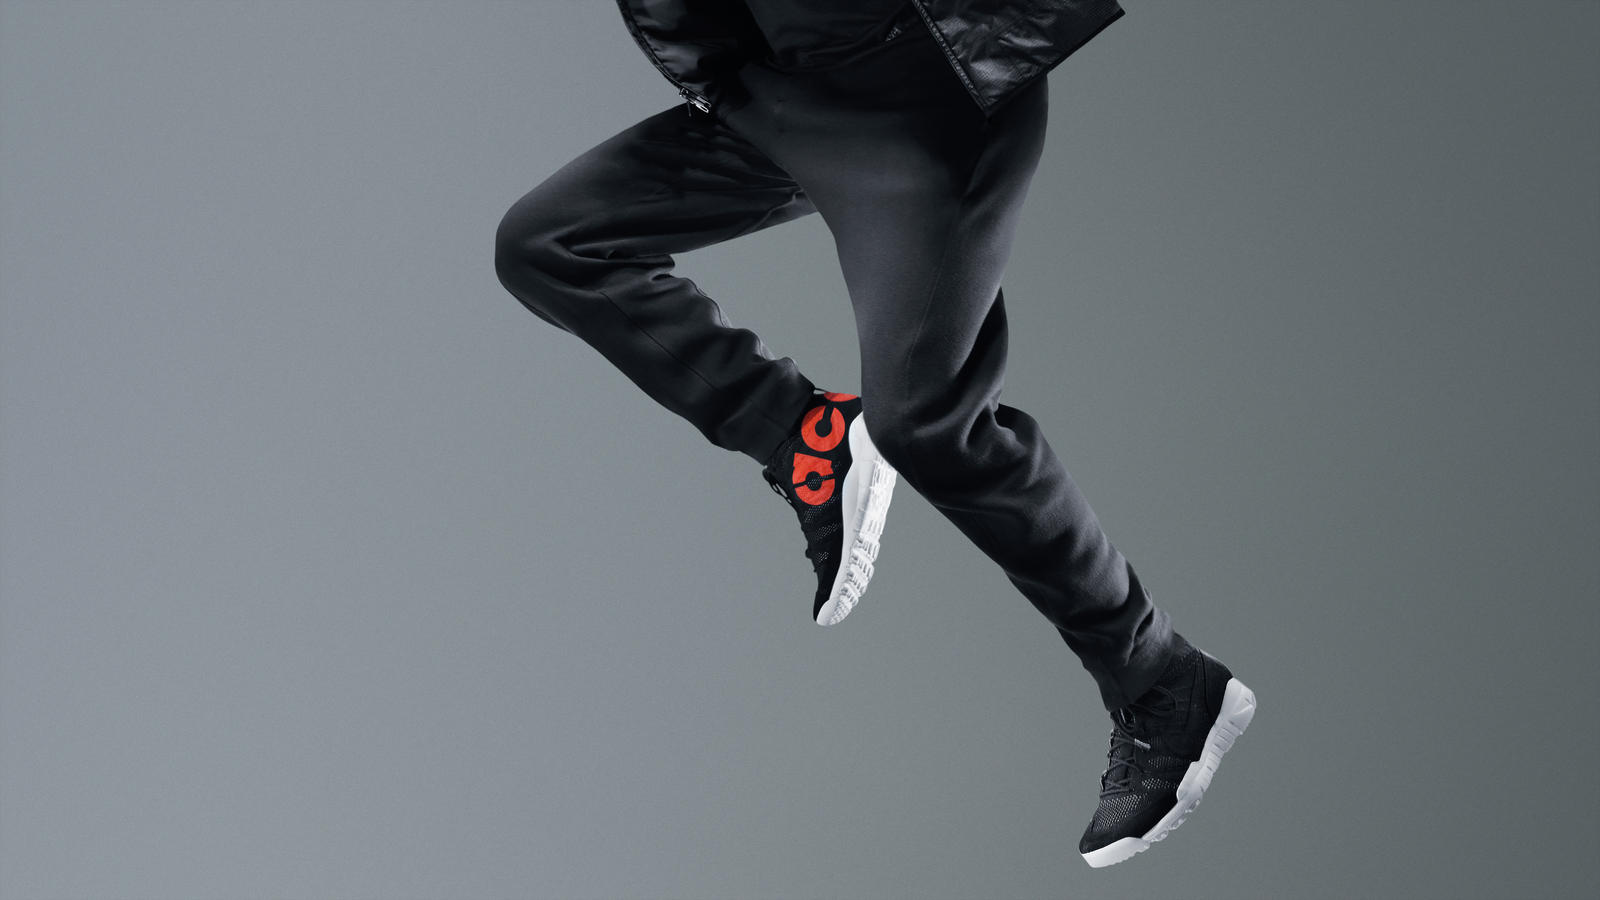 NikeLab ACG Spring 2015 Collection - This is Range